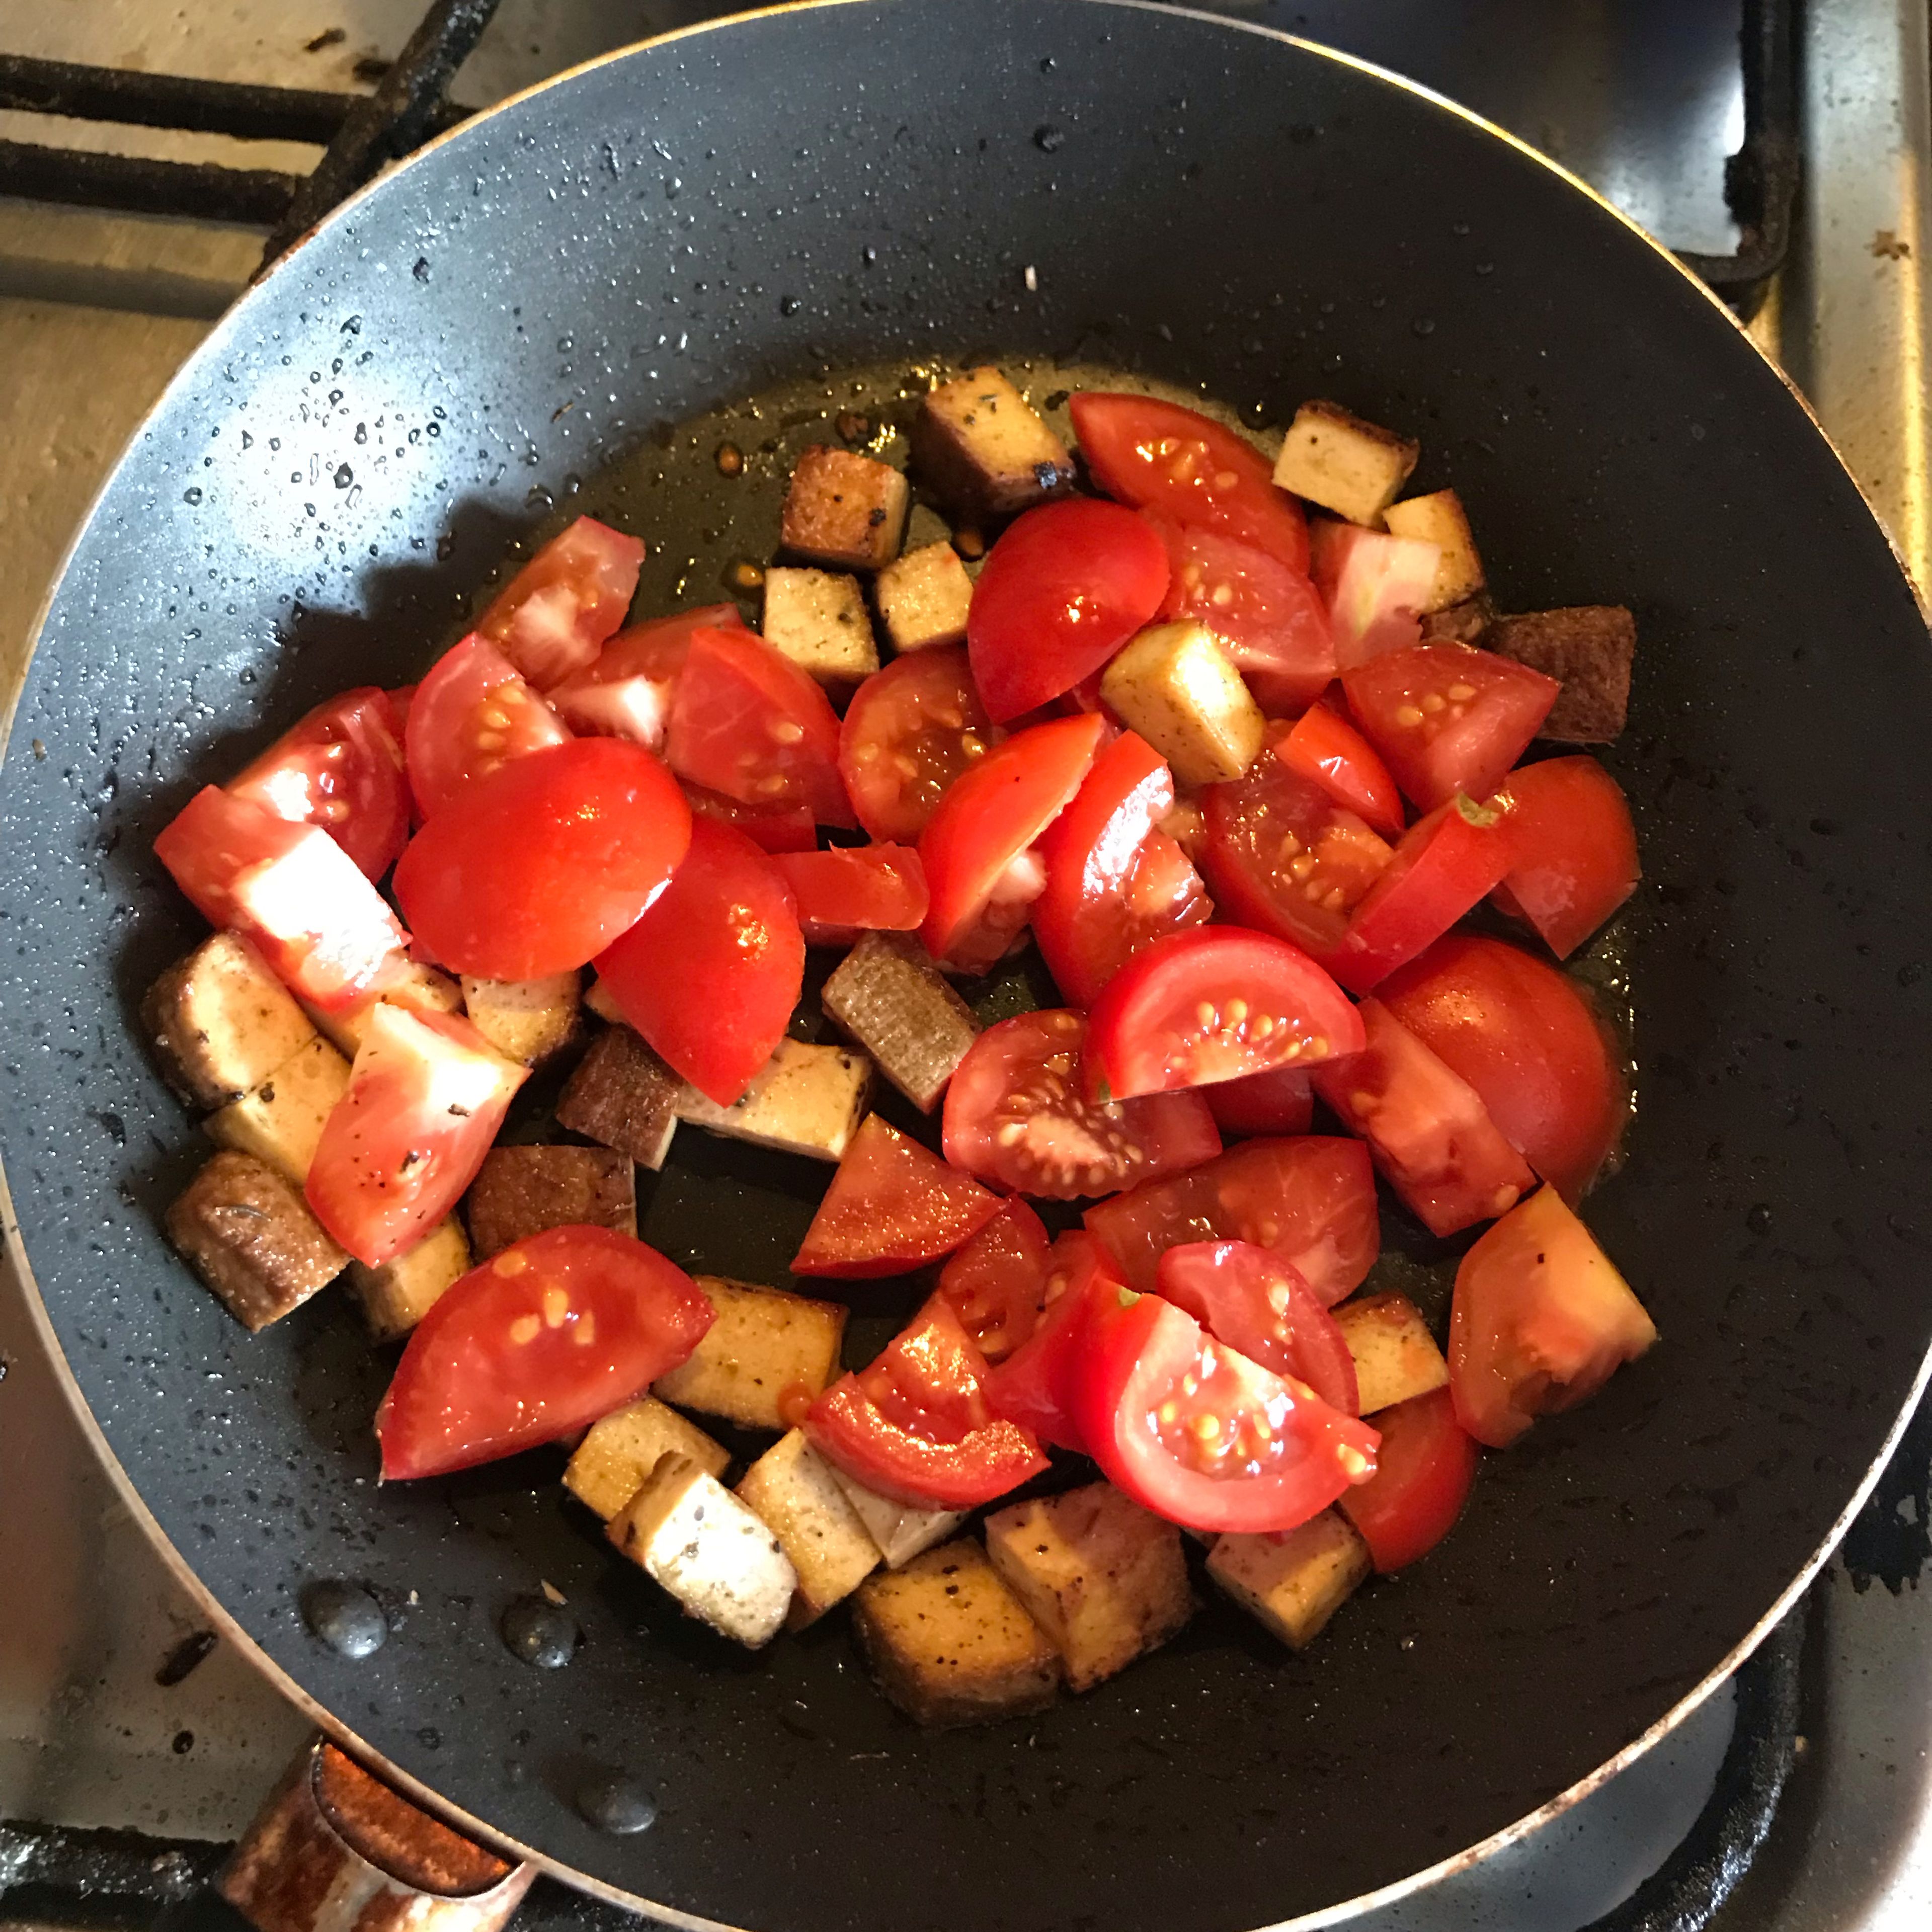 Chop tofu at cubes, add some herbs and fry a bit. Add choppef tomatoes and choppef spring onion and wait until tomatoes are soft.